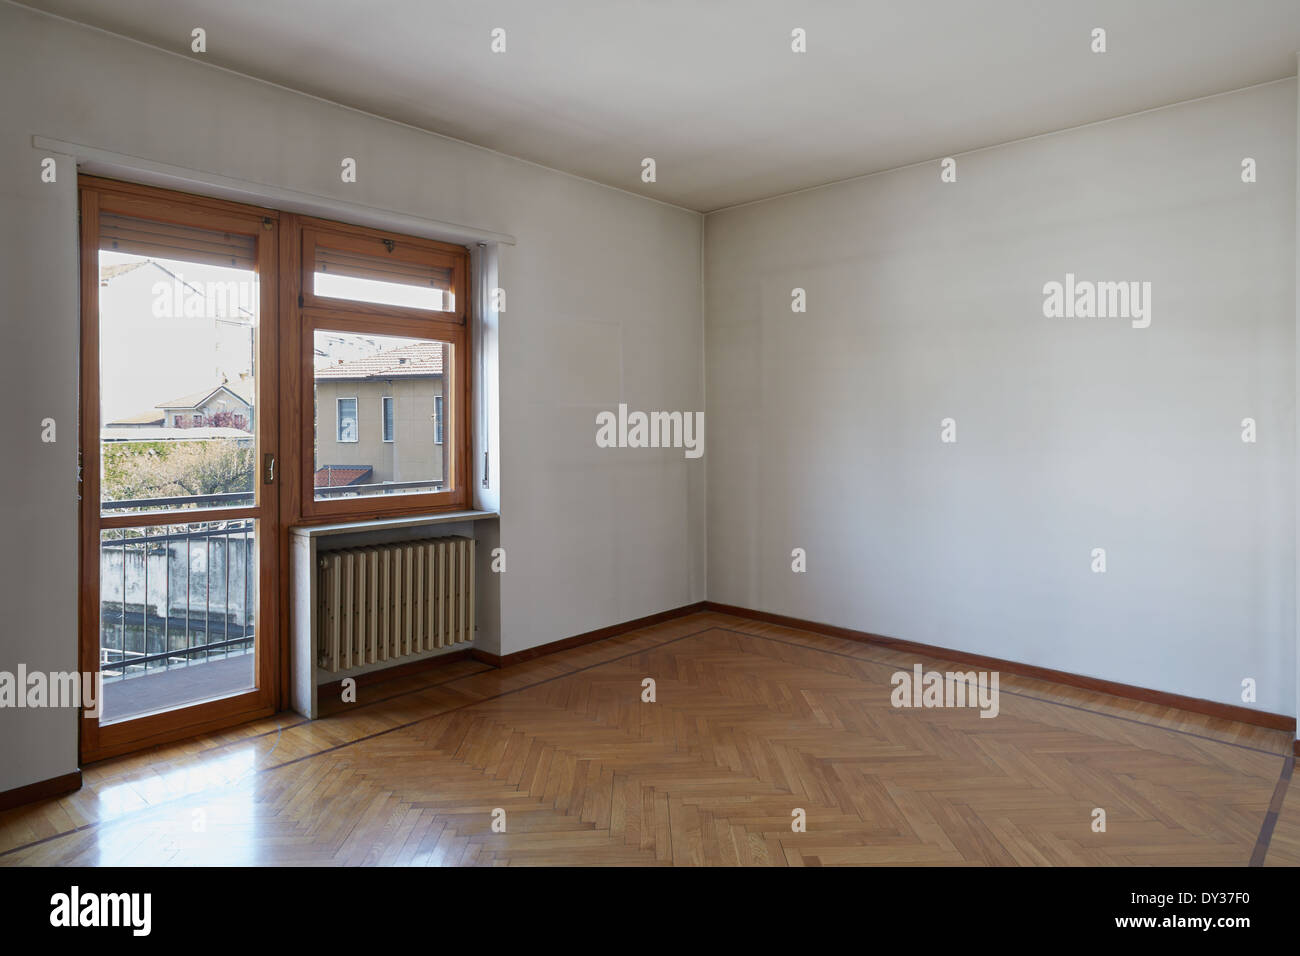 Empty room with wooden floor and dirty white walls Stock Photo